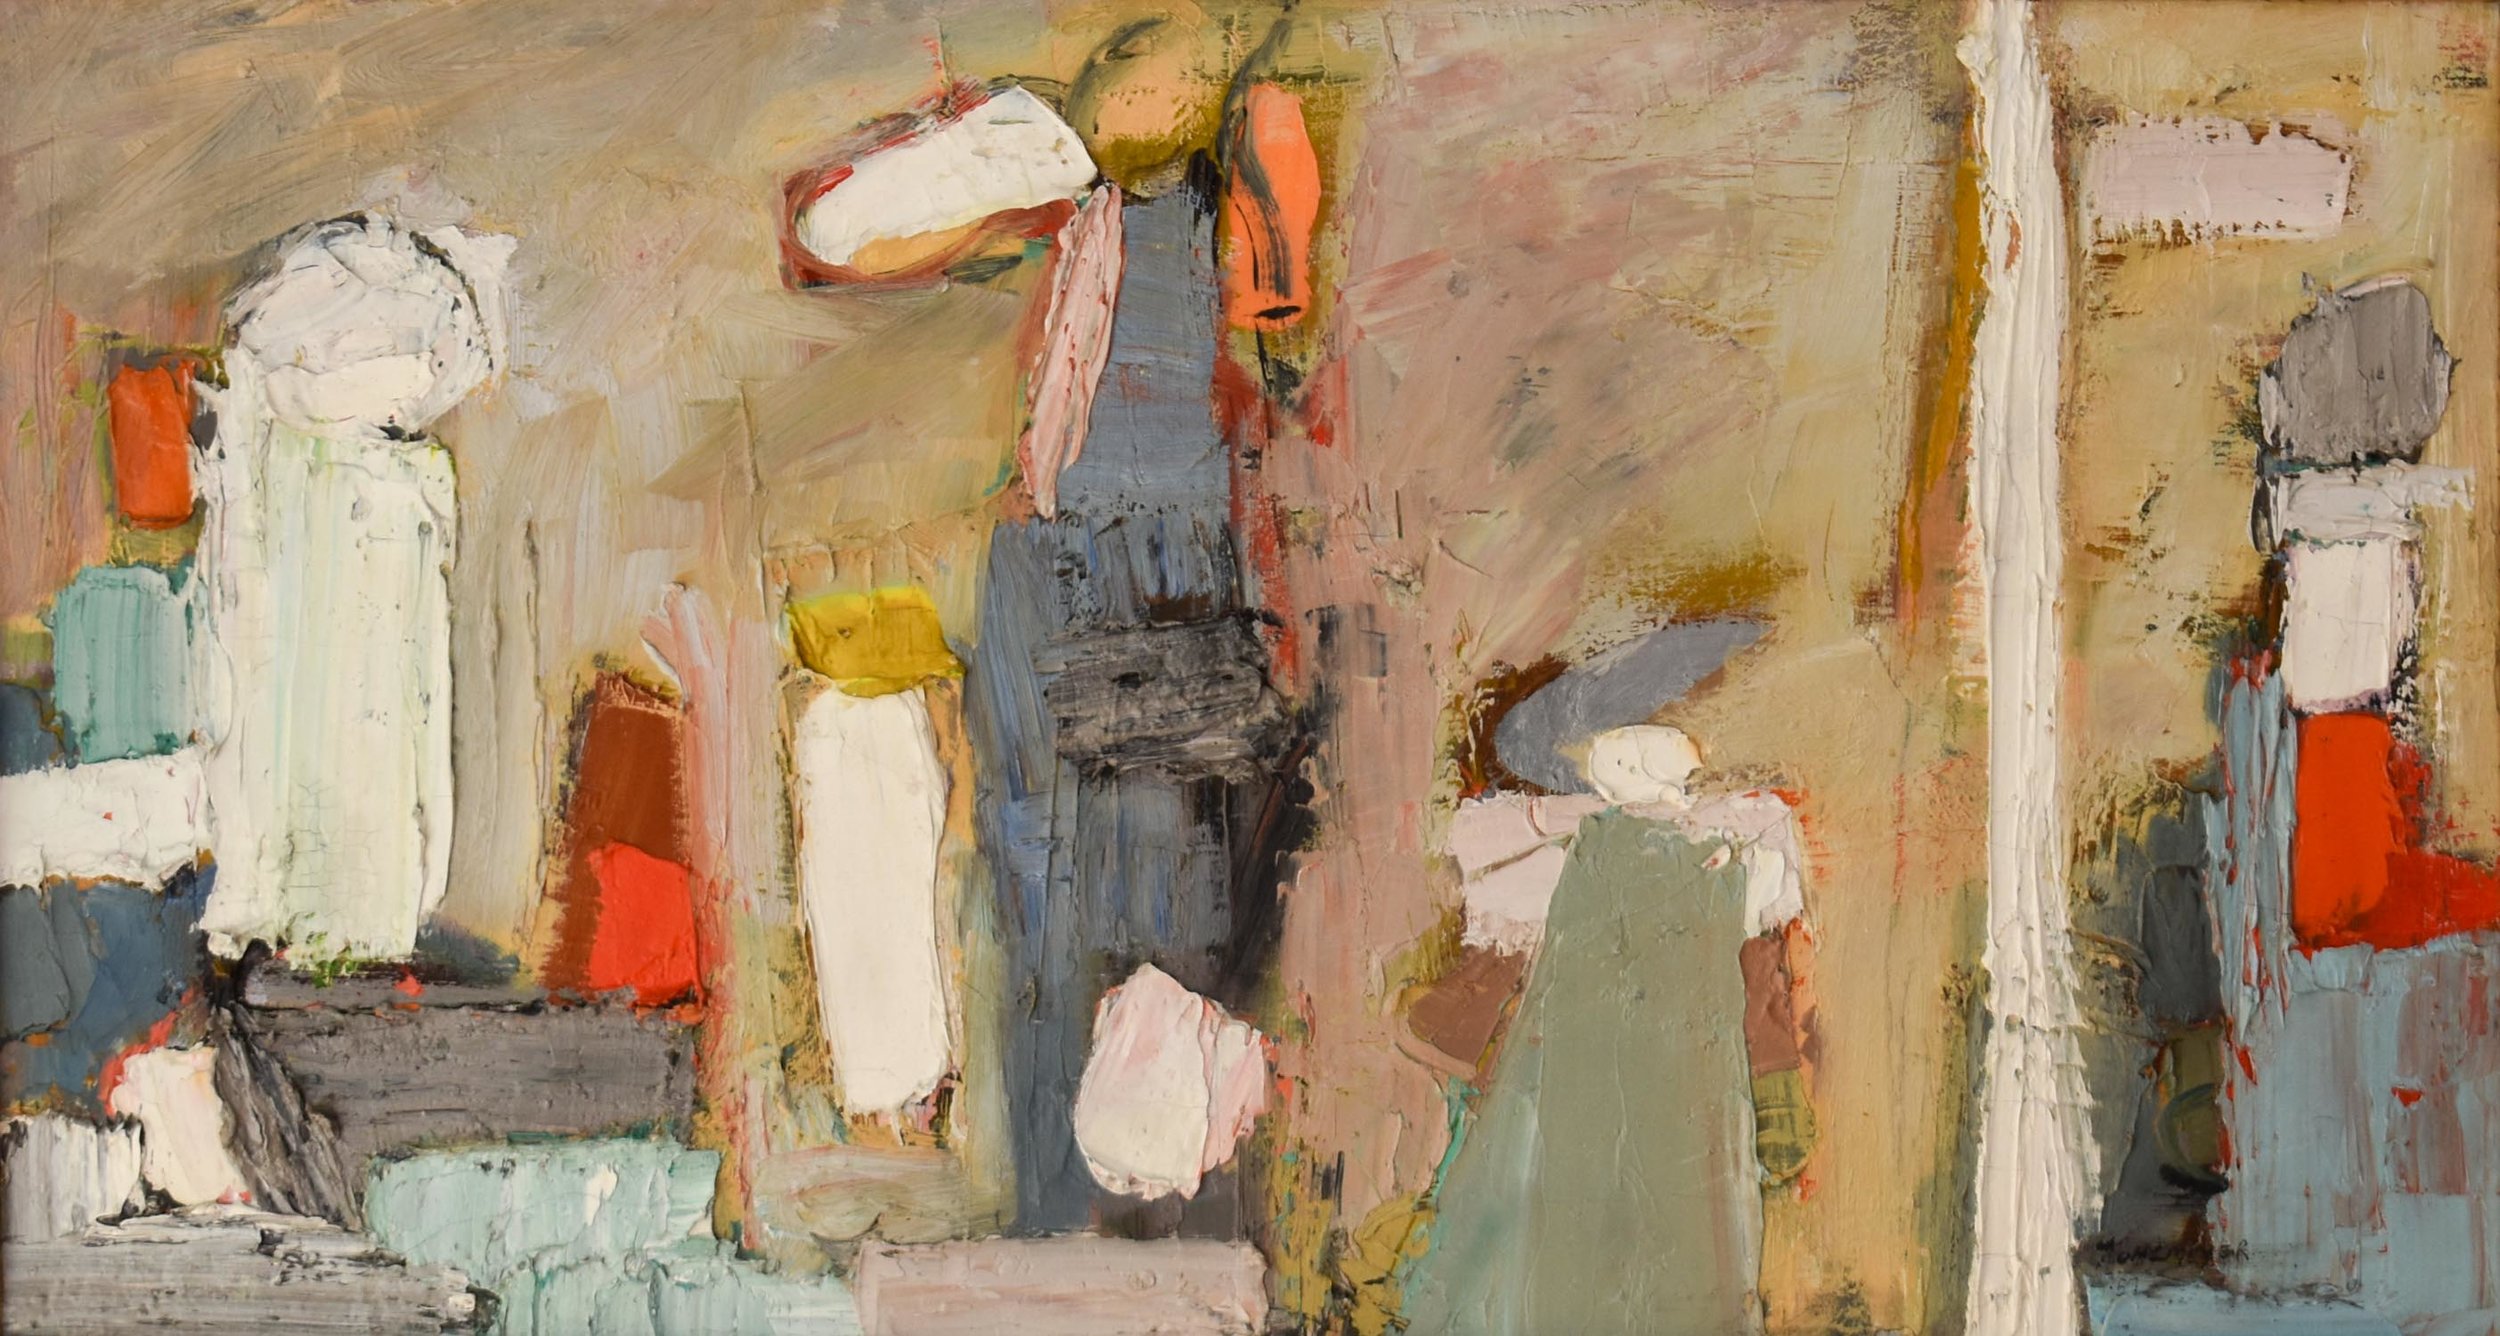   Abstract Composition , 1957 Oil on canvas, signed and dated lower right, 14 × 26 in   SOLD  